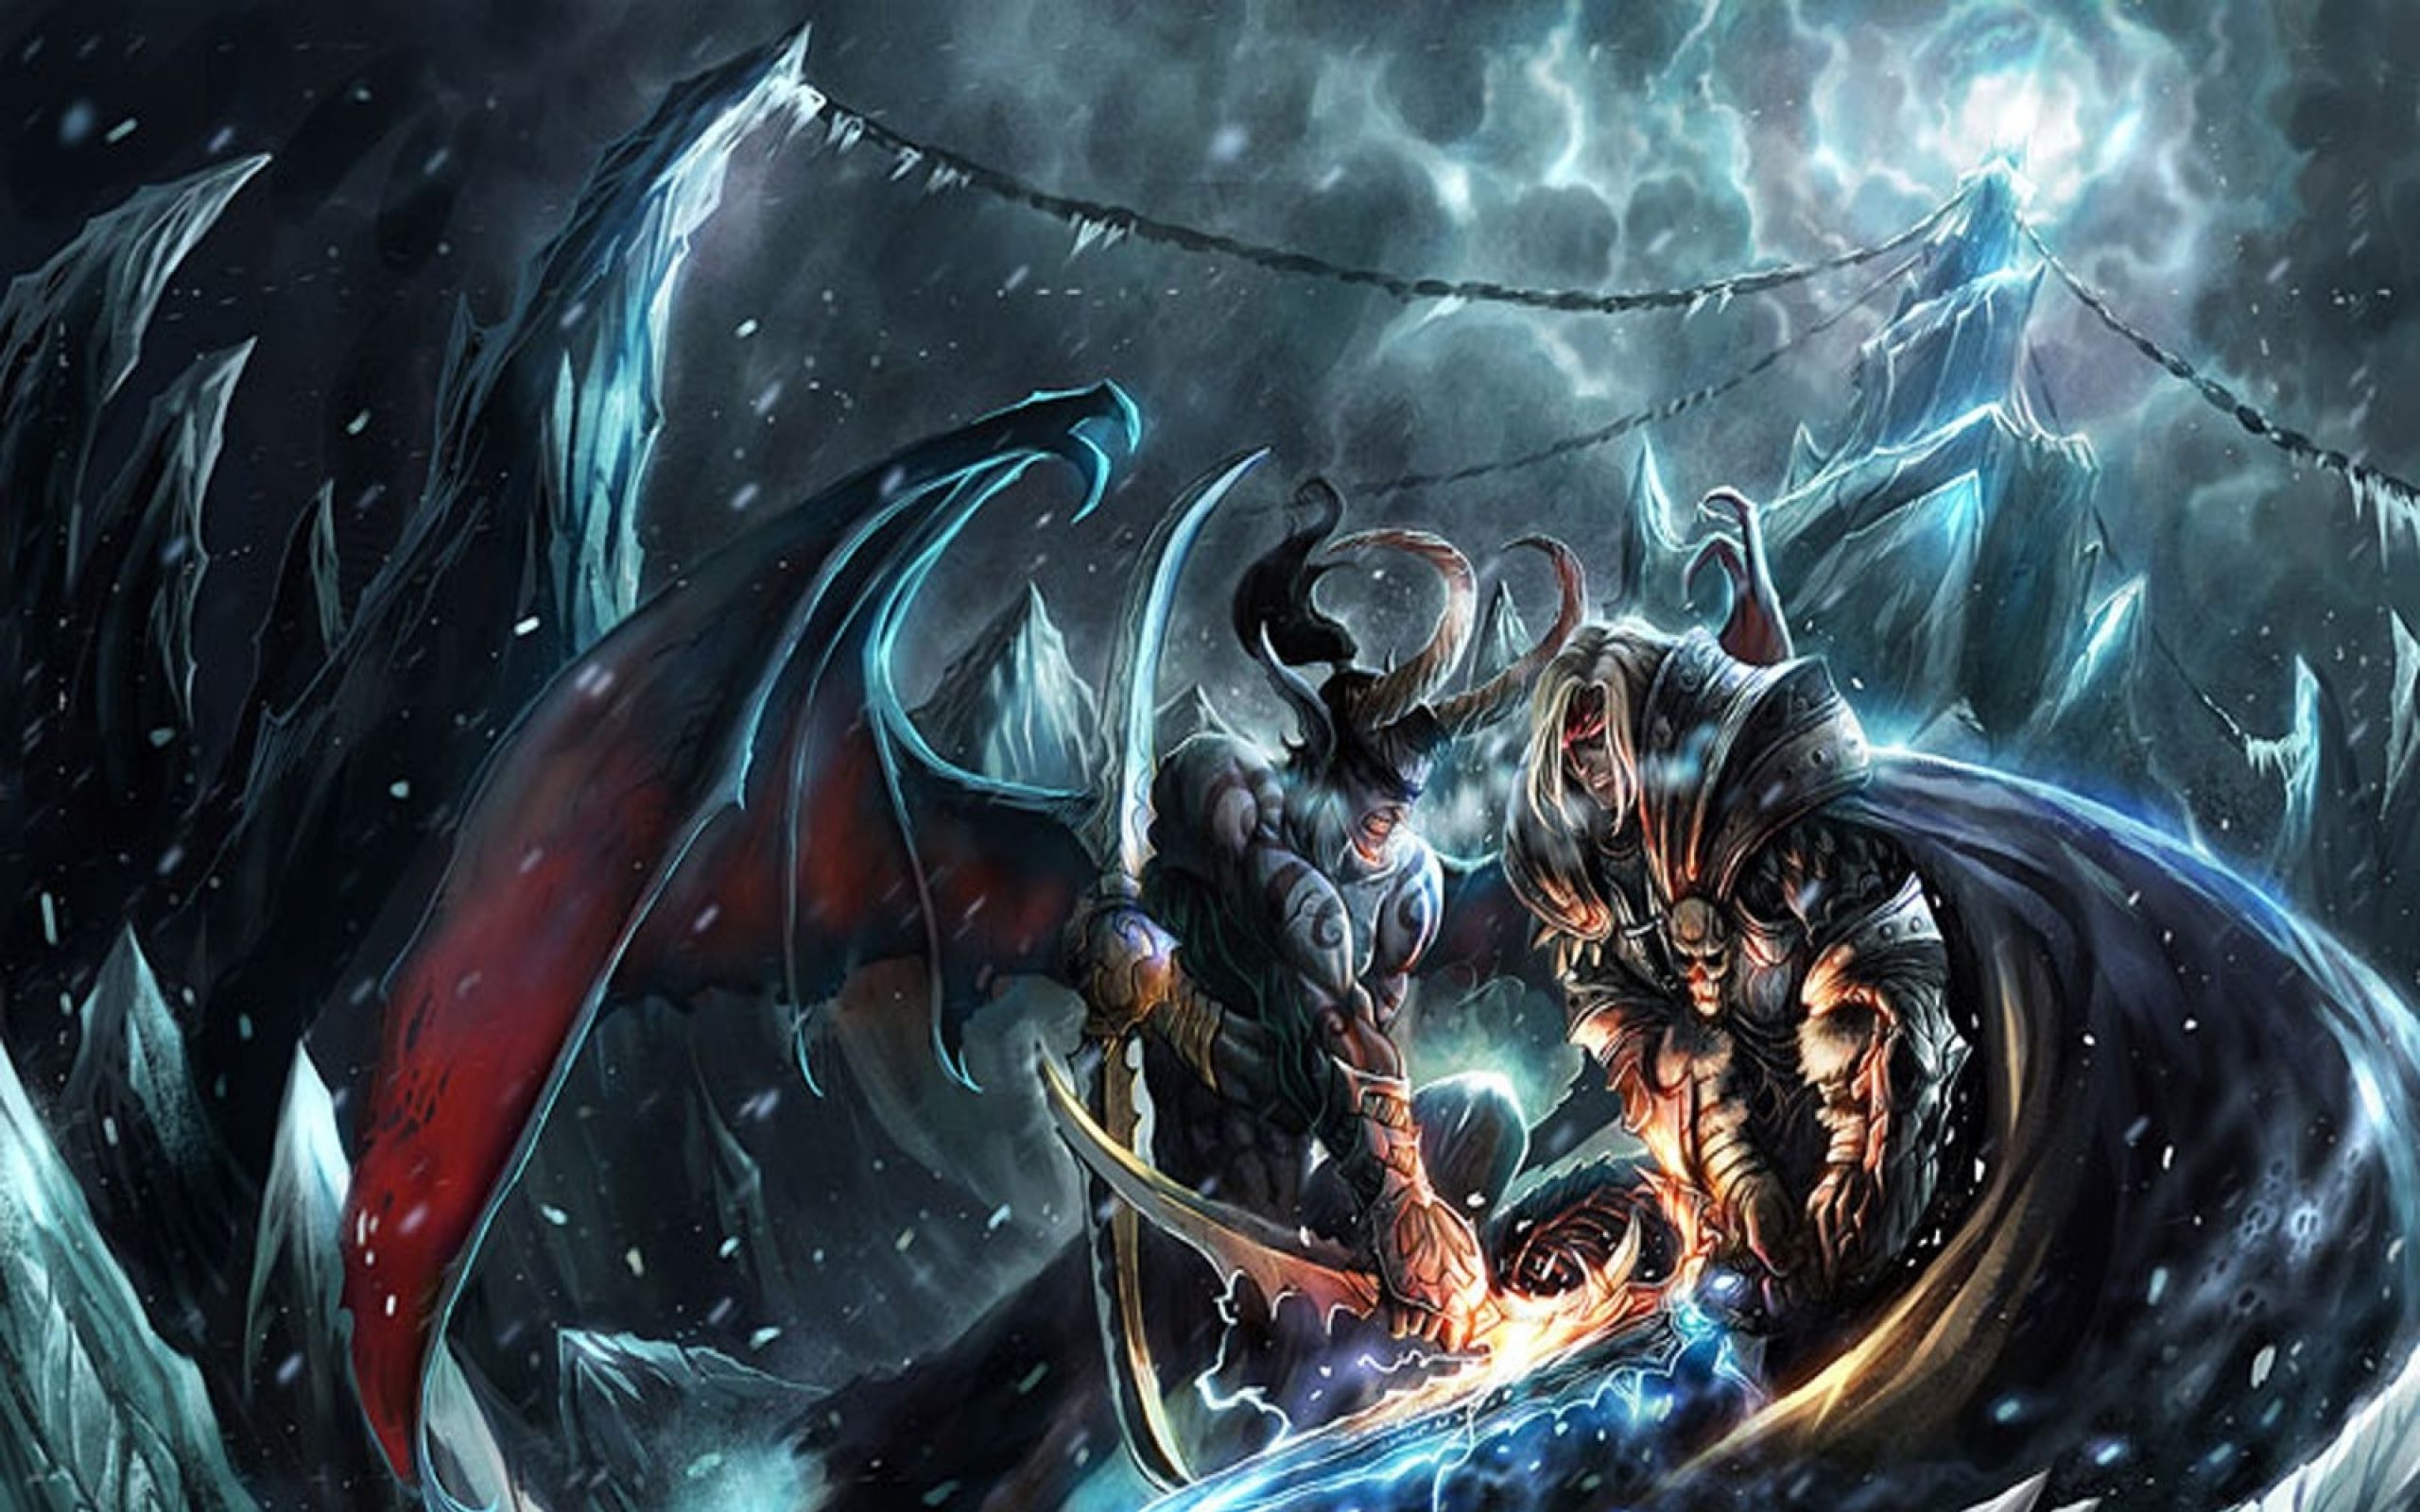 Download The Latest Warcraft 3 Frozen Throne HD Wallpaper From